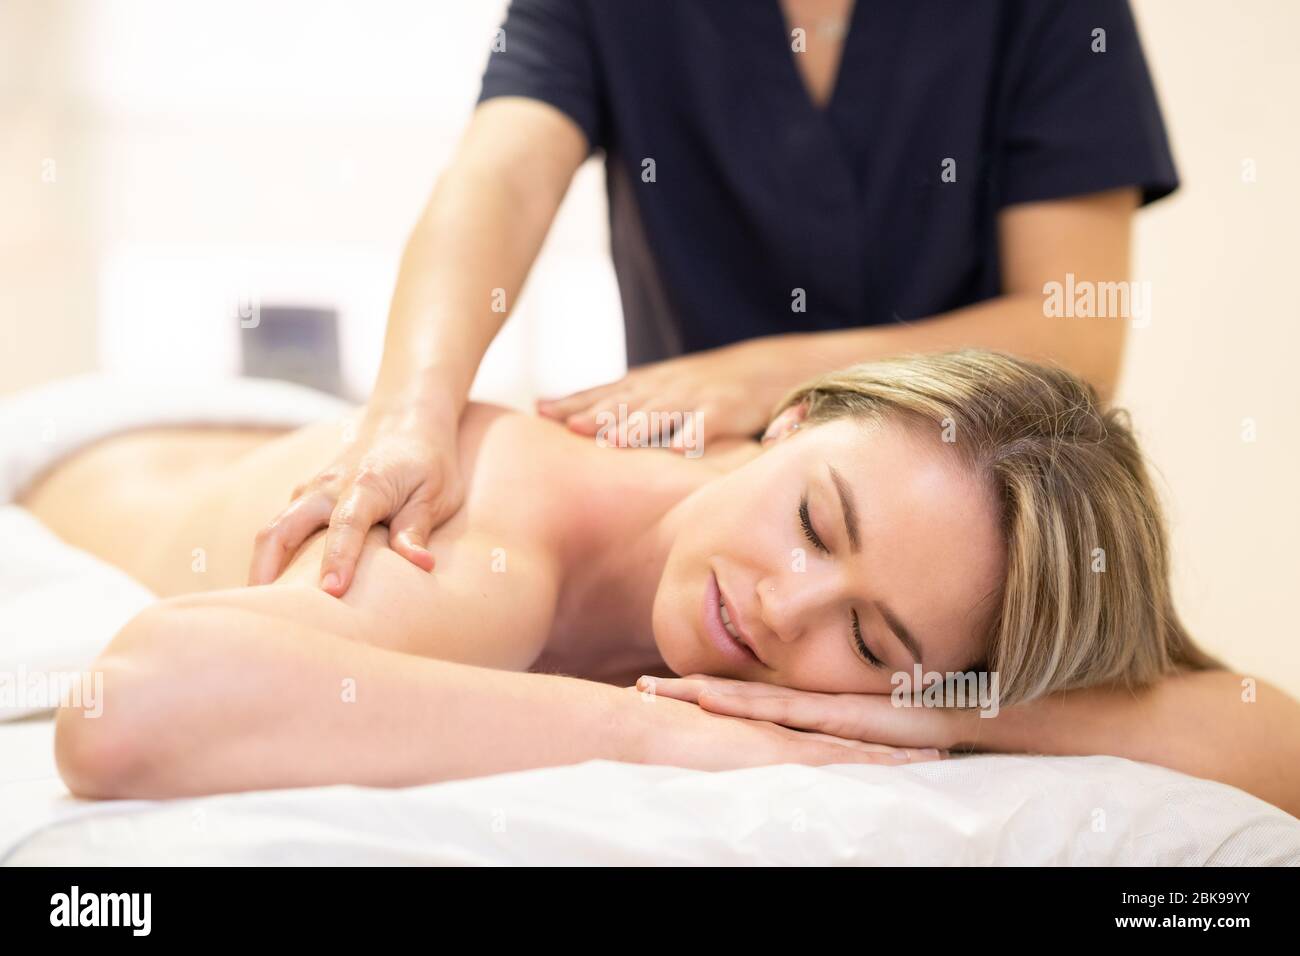 Woman lying on a stretcher receiving a back massage. Stock Photo